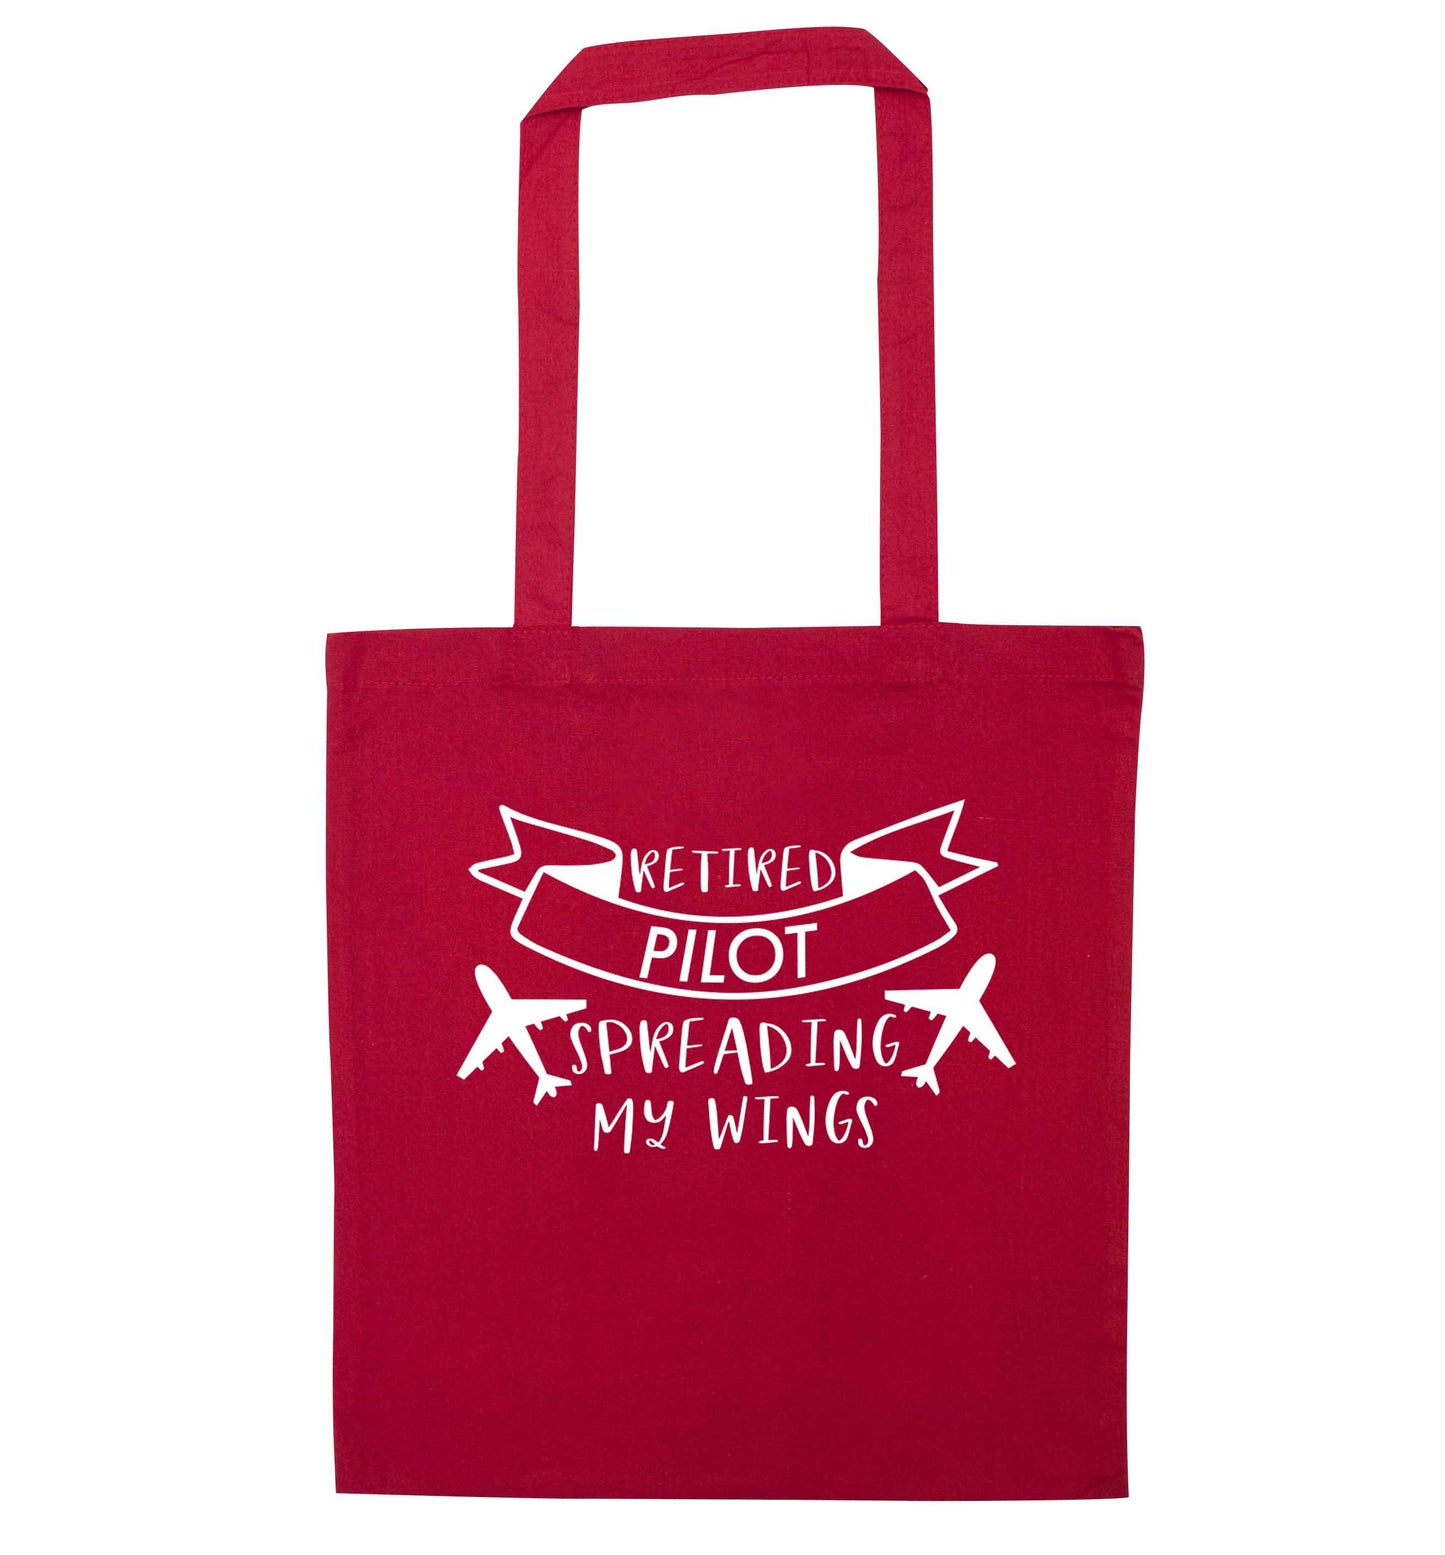 Retired pilot spreading my wings red tote bag